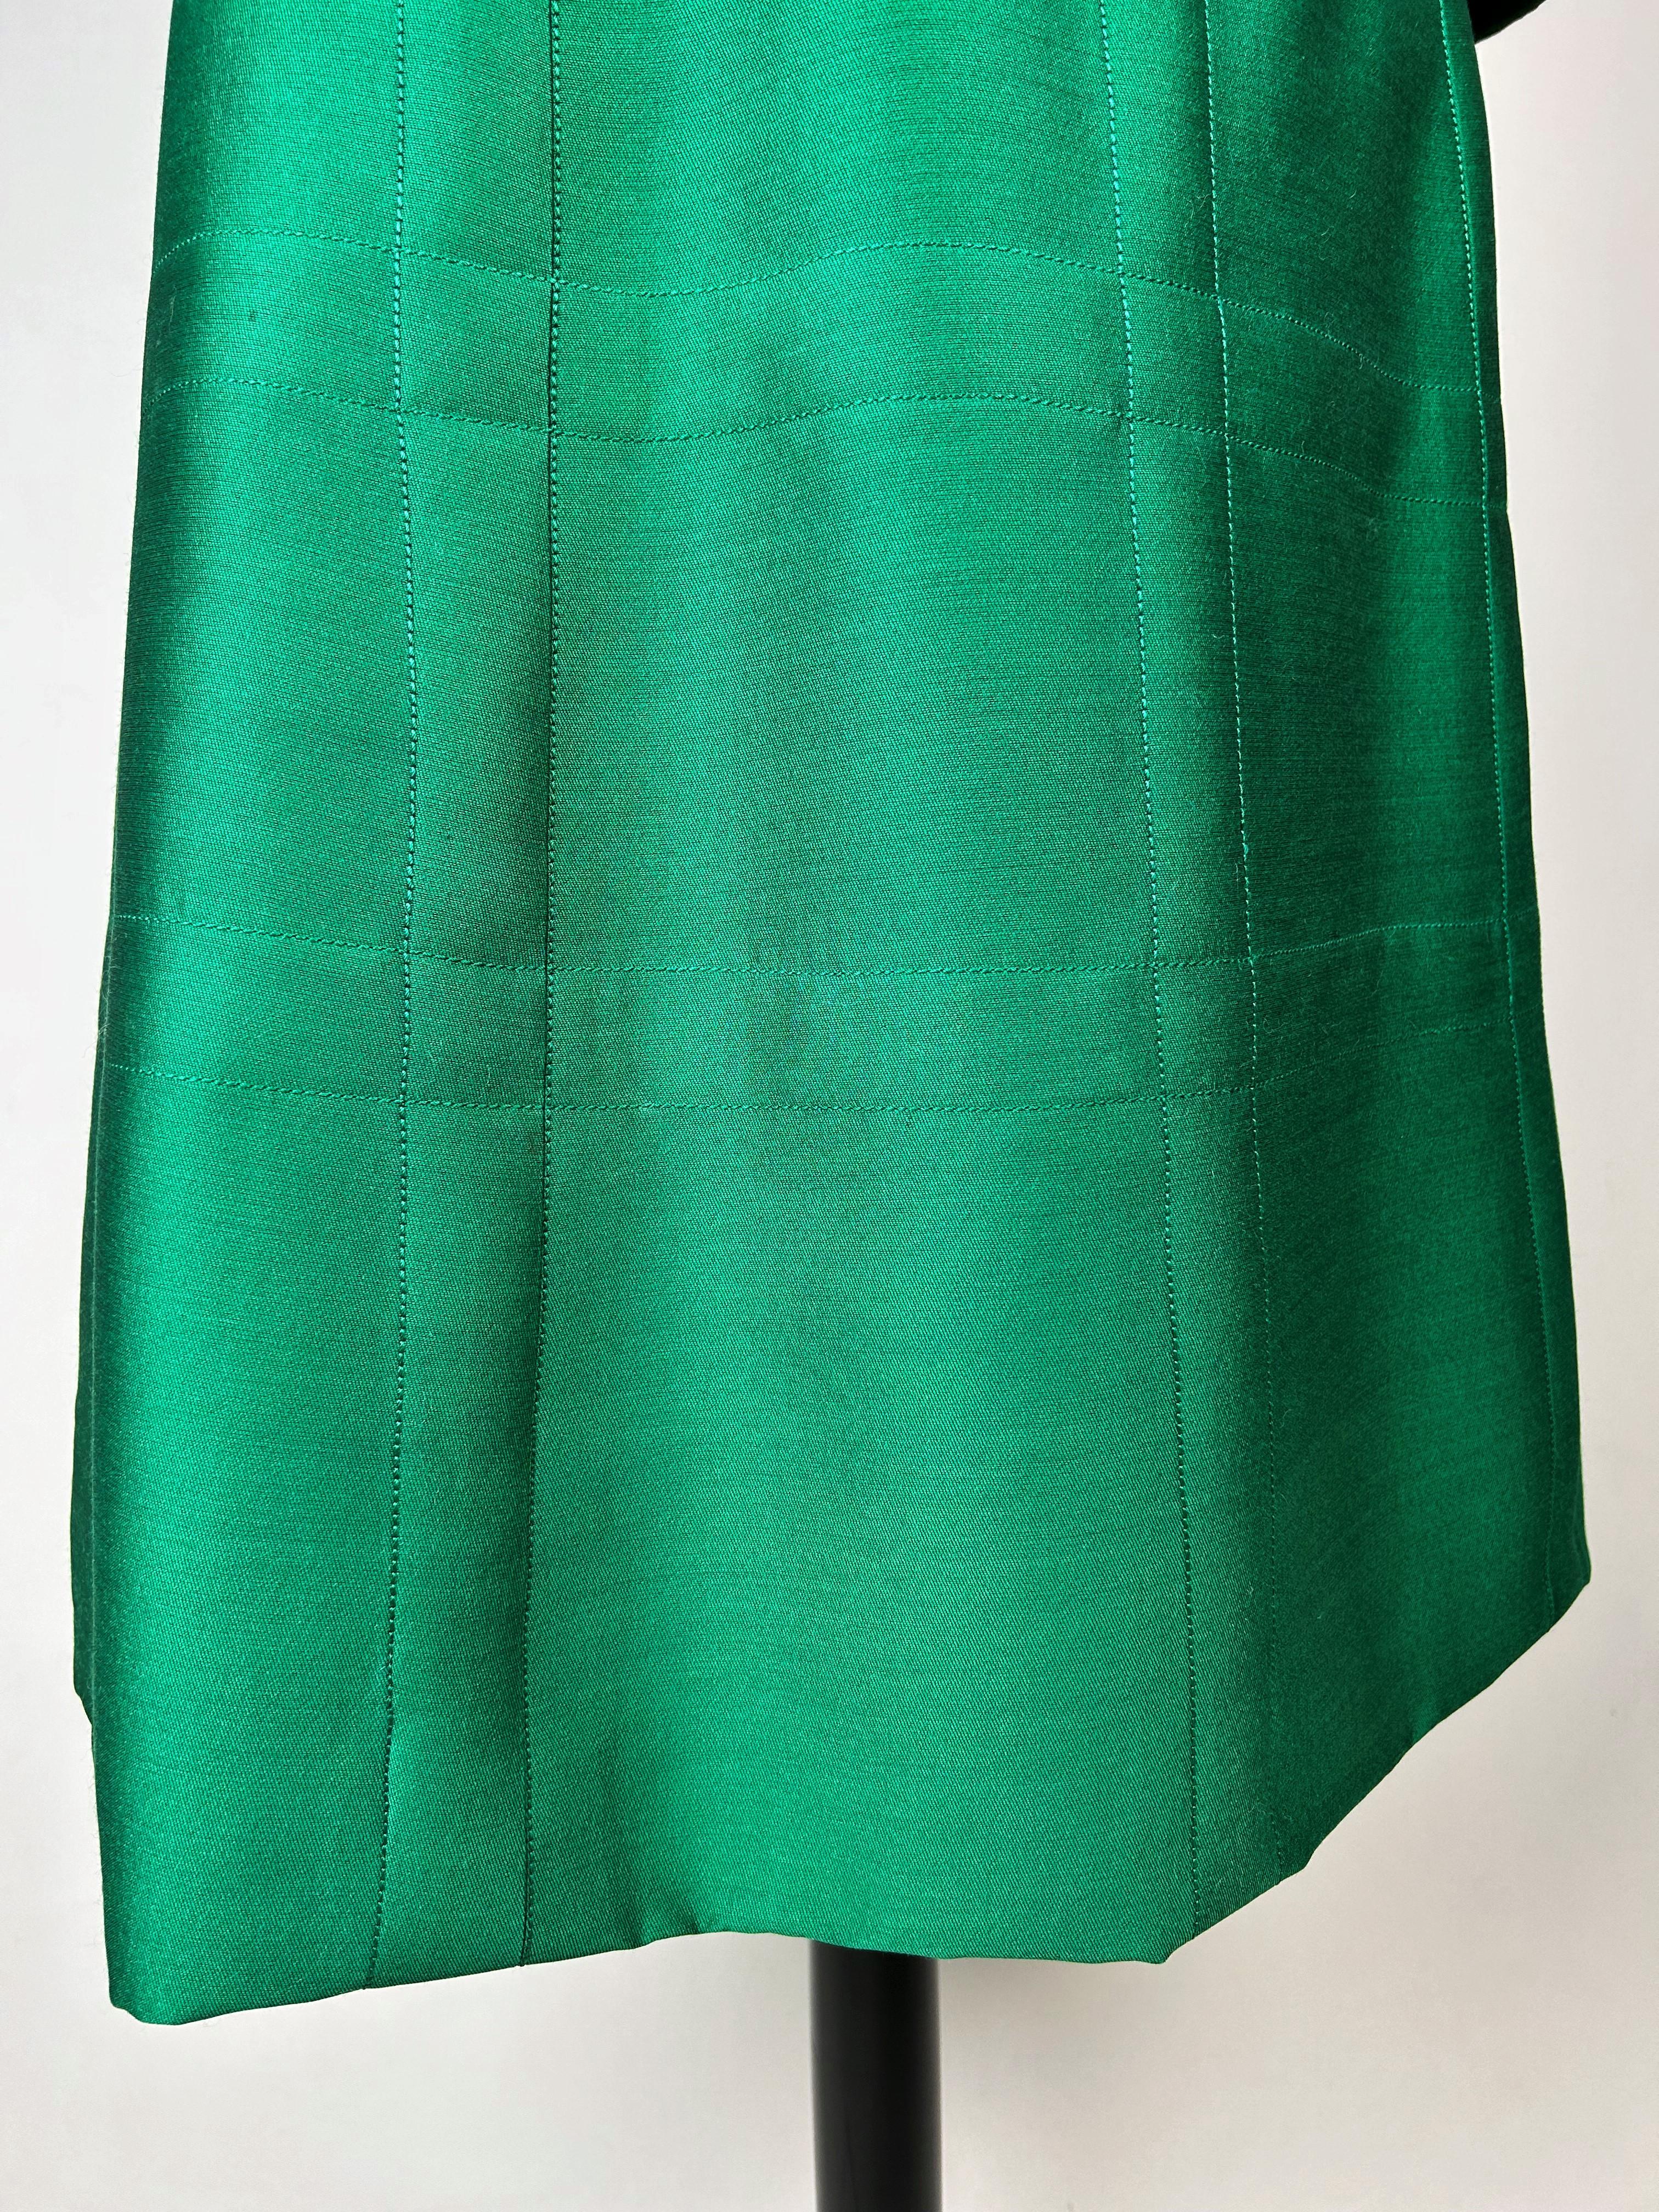 An Emerald Gazar Demi-Couture Skirt Suit by Louis Féraud Circa 1968-1972 For Sale 9